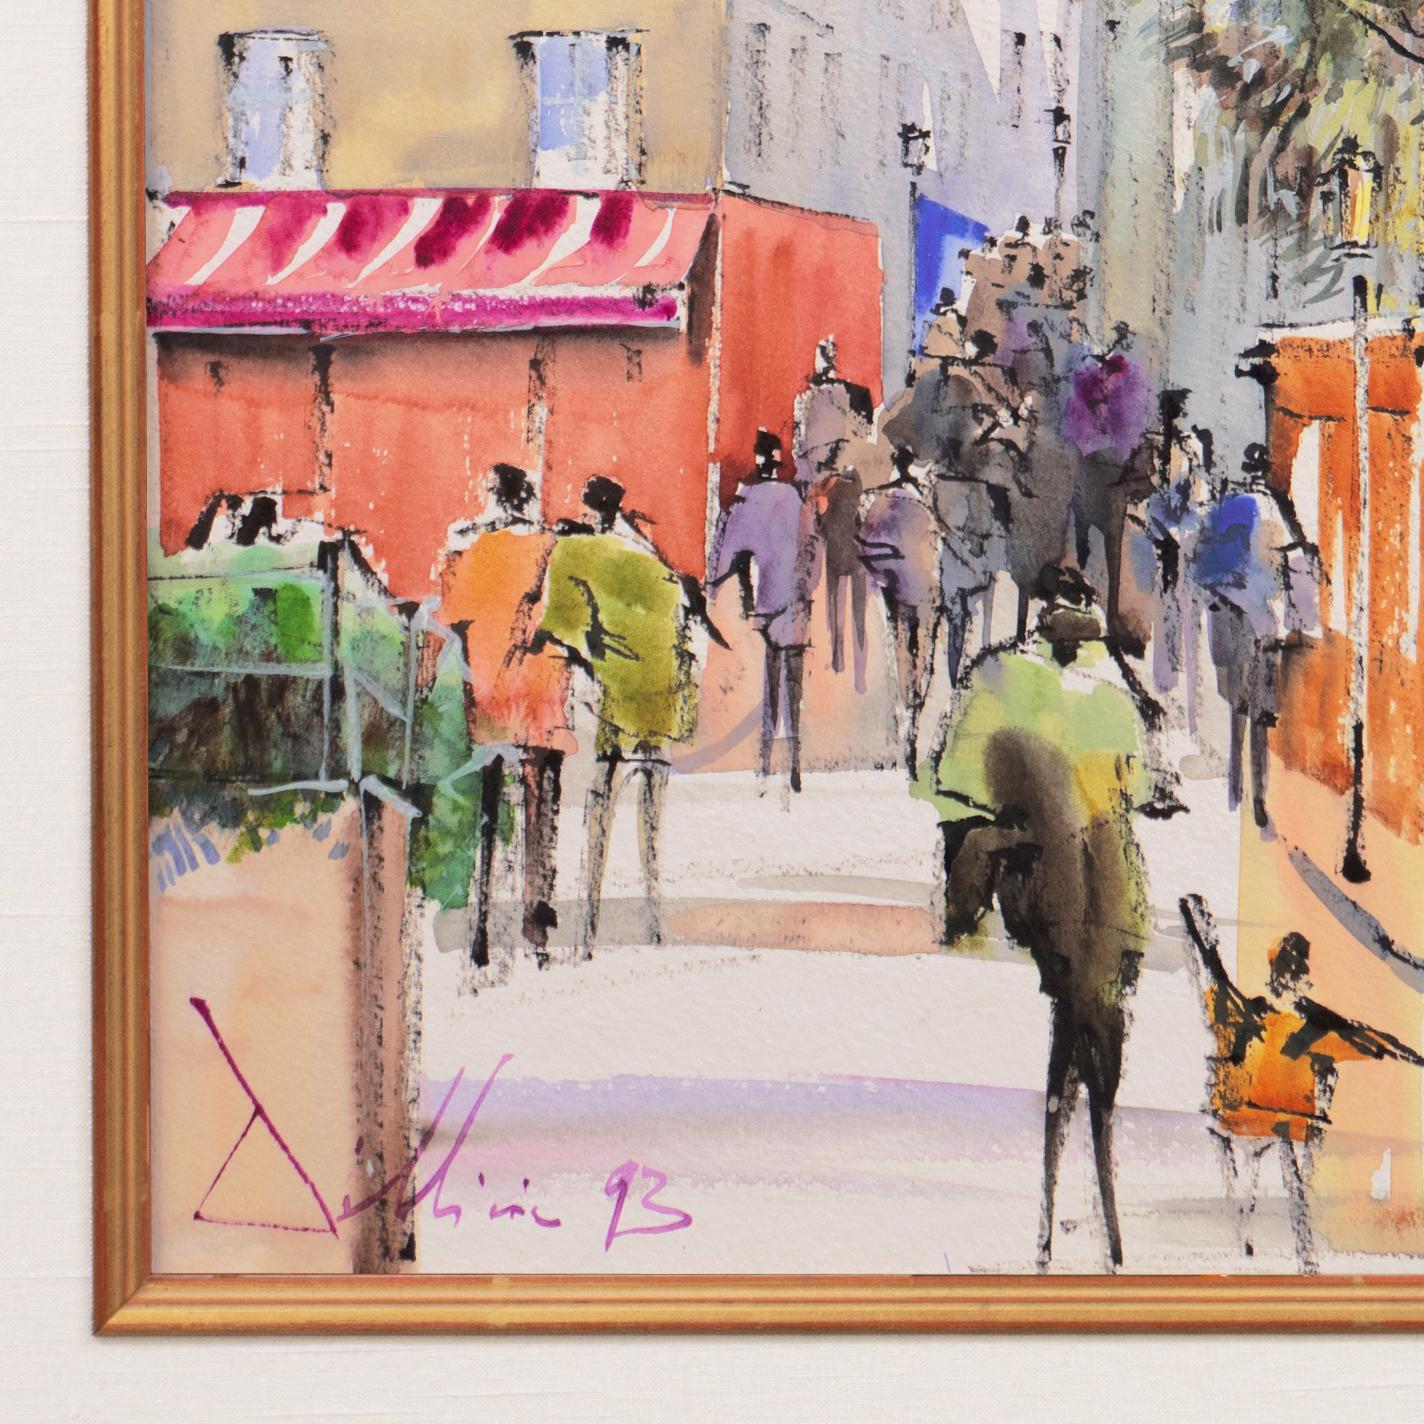 20th Century French School; Signed indistinctly, lower left, 'De Mini? and dated 1993.

A Post-Impressionist style, Parisian cityscape showing a view of Montmartre with numerous pedestrians walking in the street beside the Café Le Consulat and the